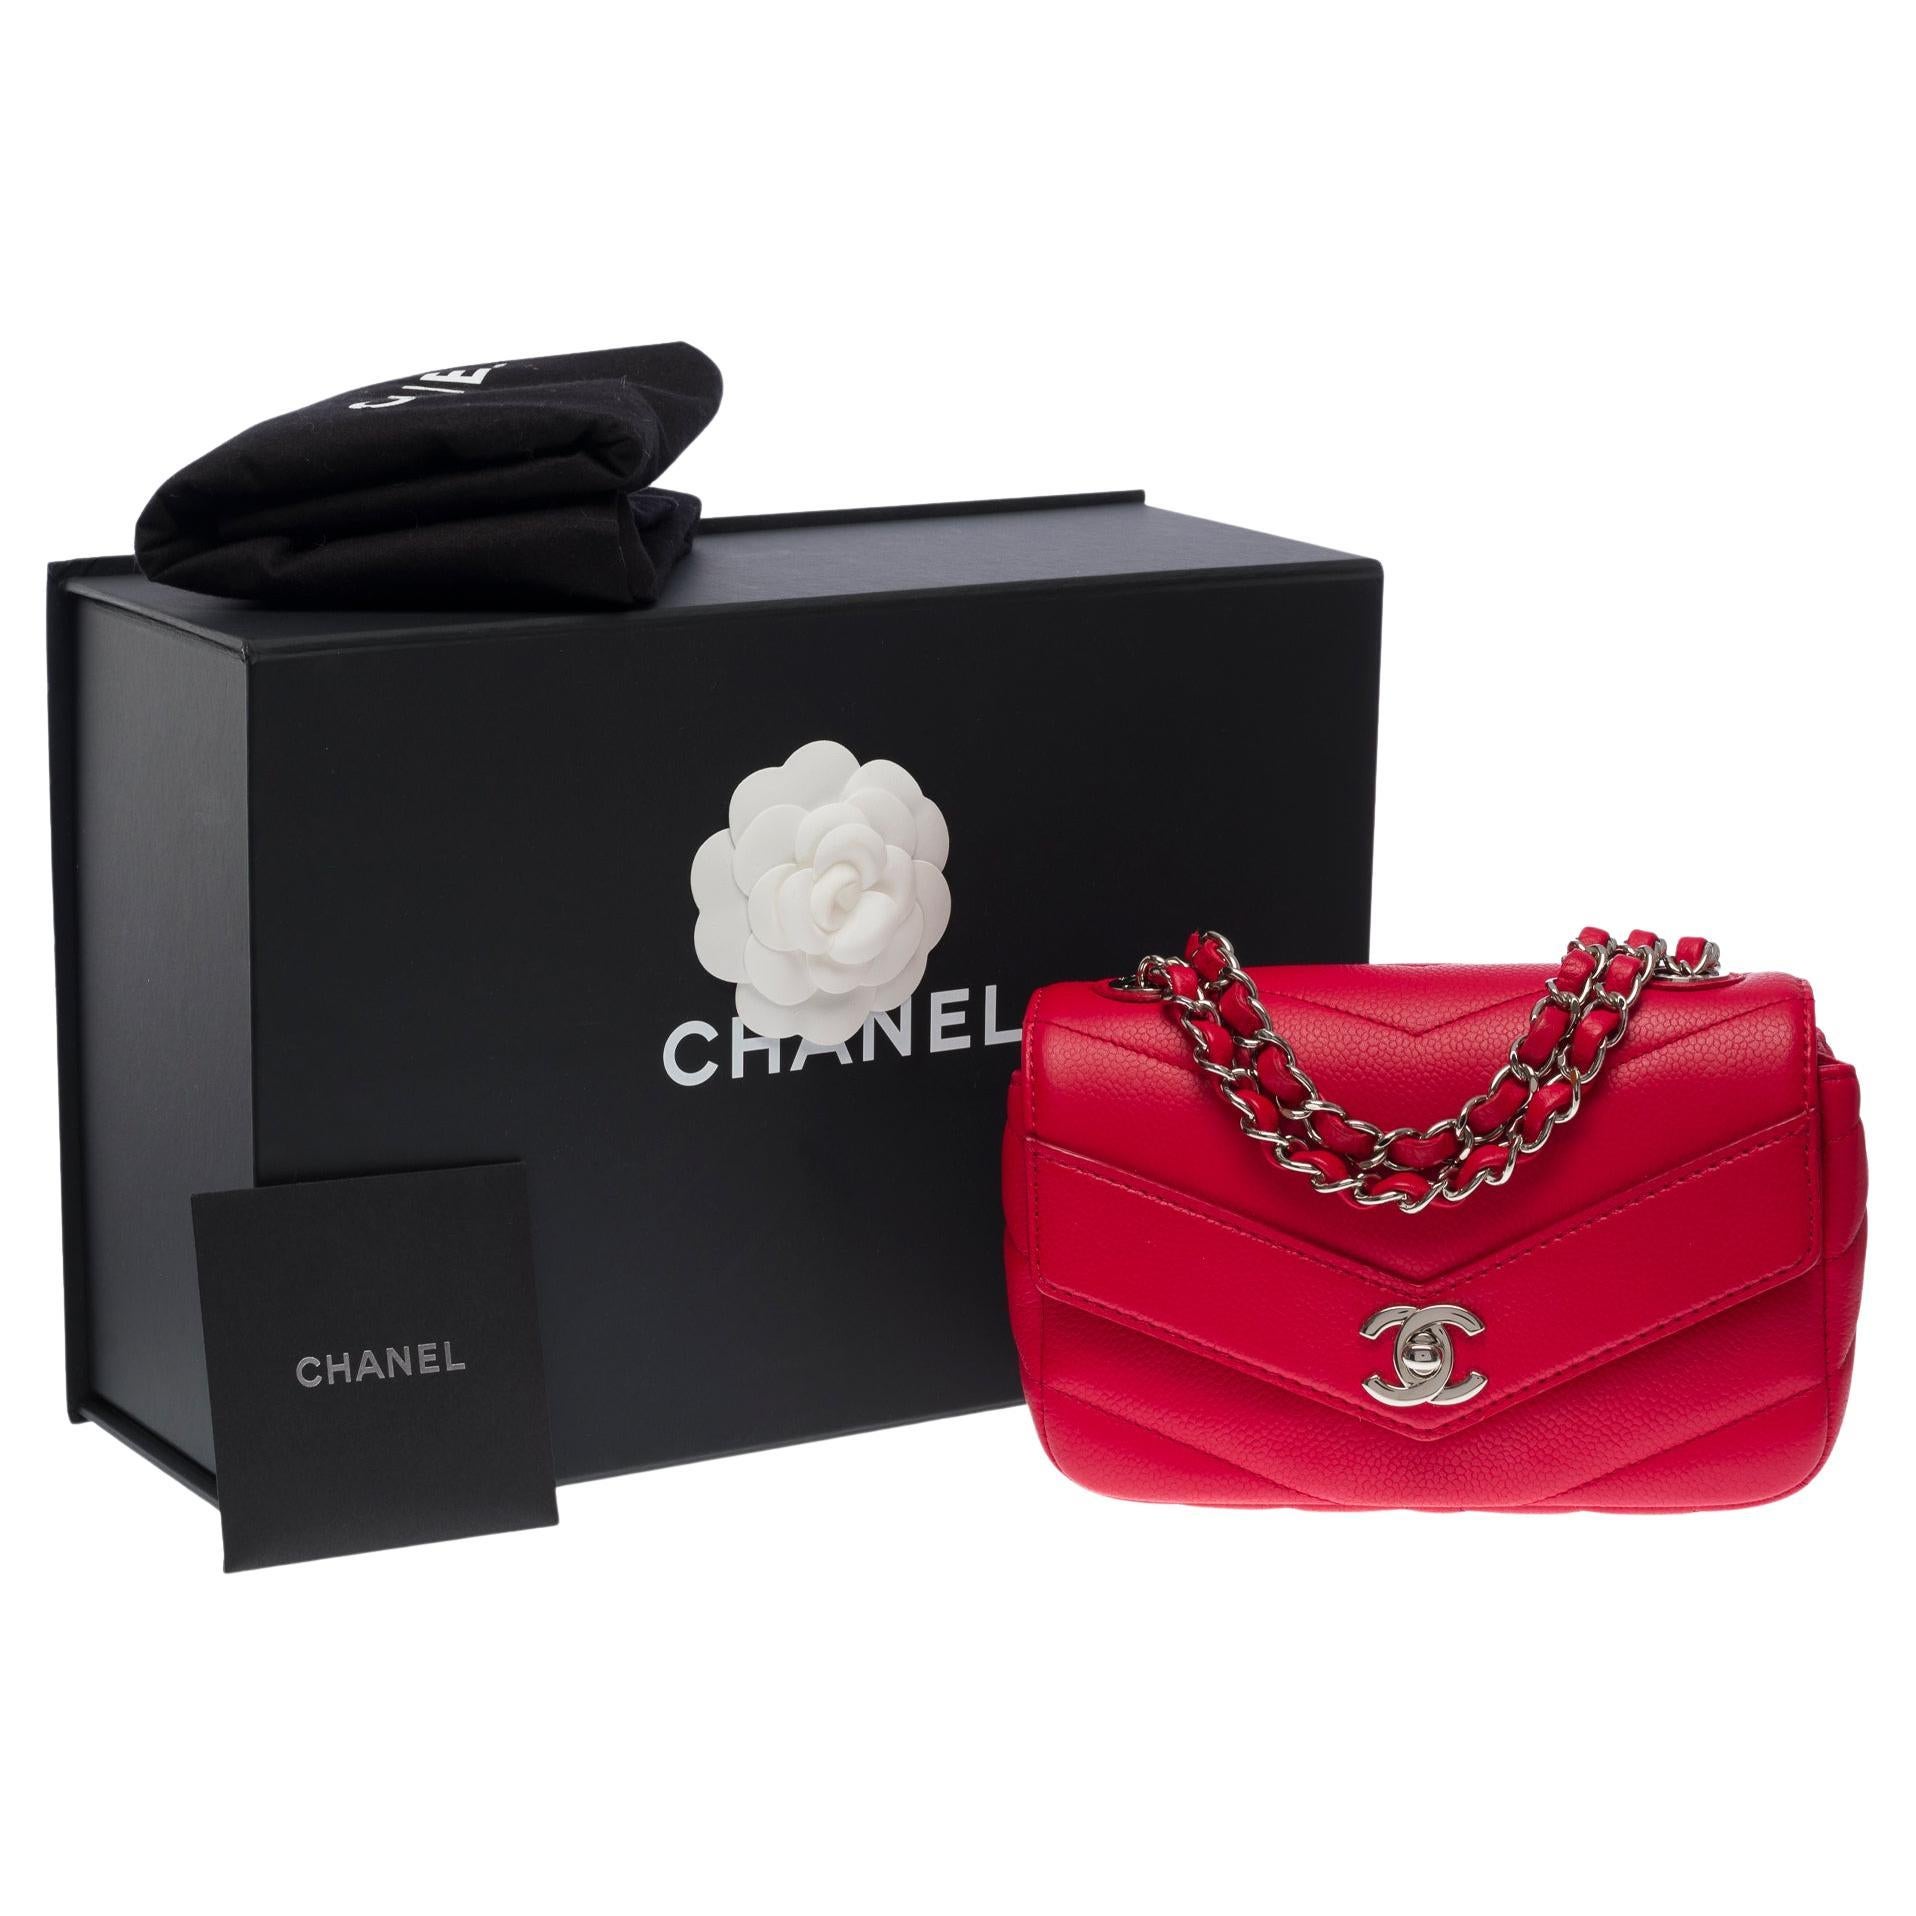 Chanel Mini Timeless Shoulder Bag in Red Herringbone Quilted Caviar Leather, SHW